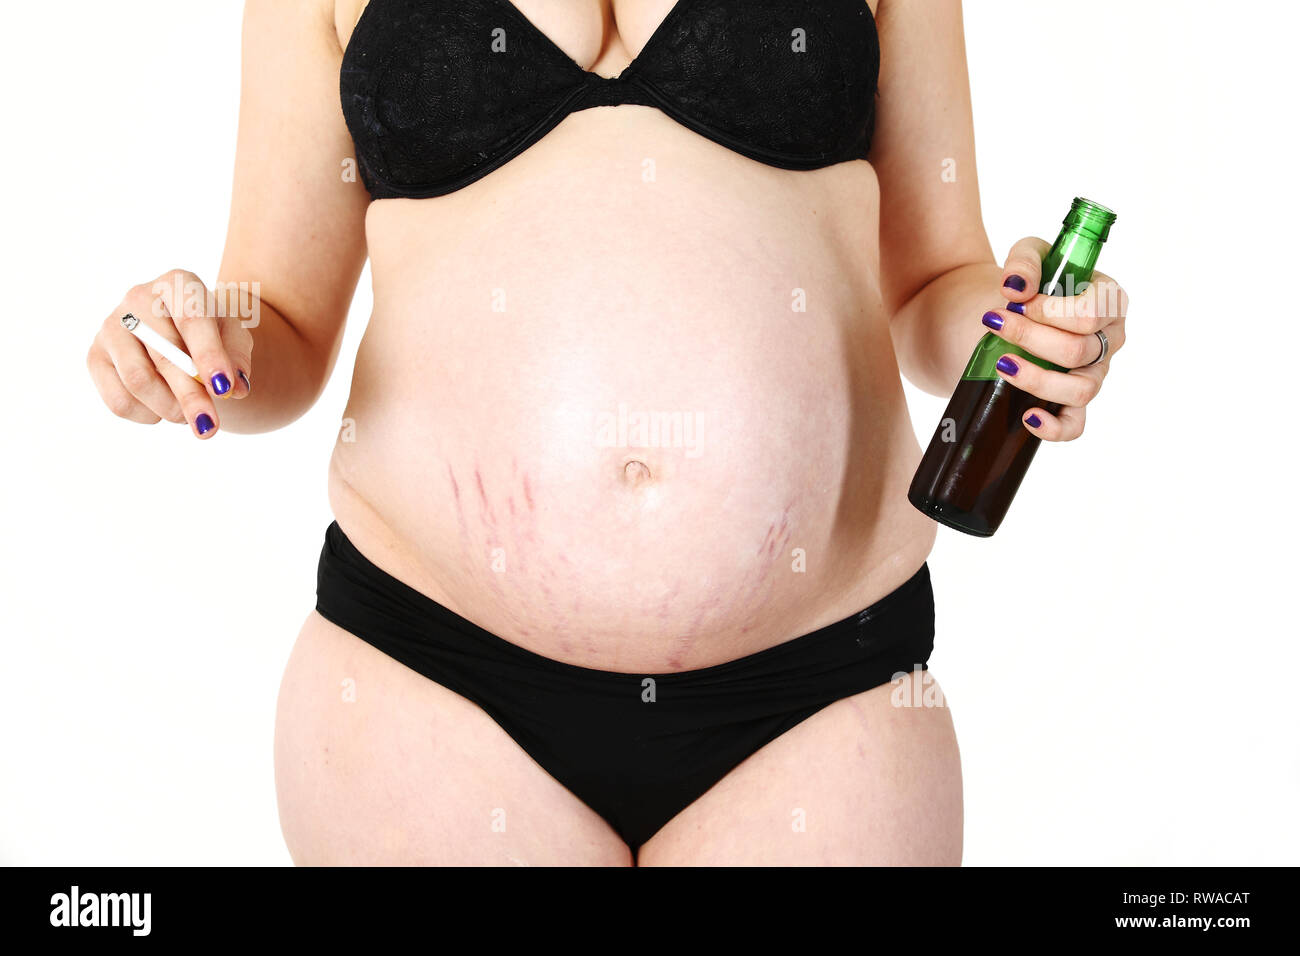 https://c8.alamy.com/comp/RWACAT/a-pregnant-woman-shows-her-baby-belly-in-her-hands-she-holds-a-cigarette-and-a-bottle-of-beer-an-example-of-bad-behaviour-during-pregnancy-RWACAT.jpg